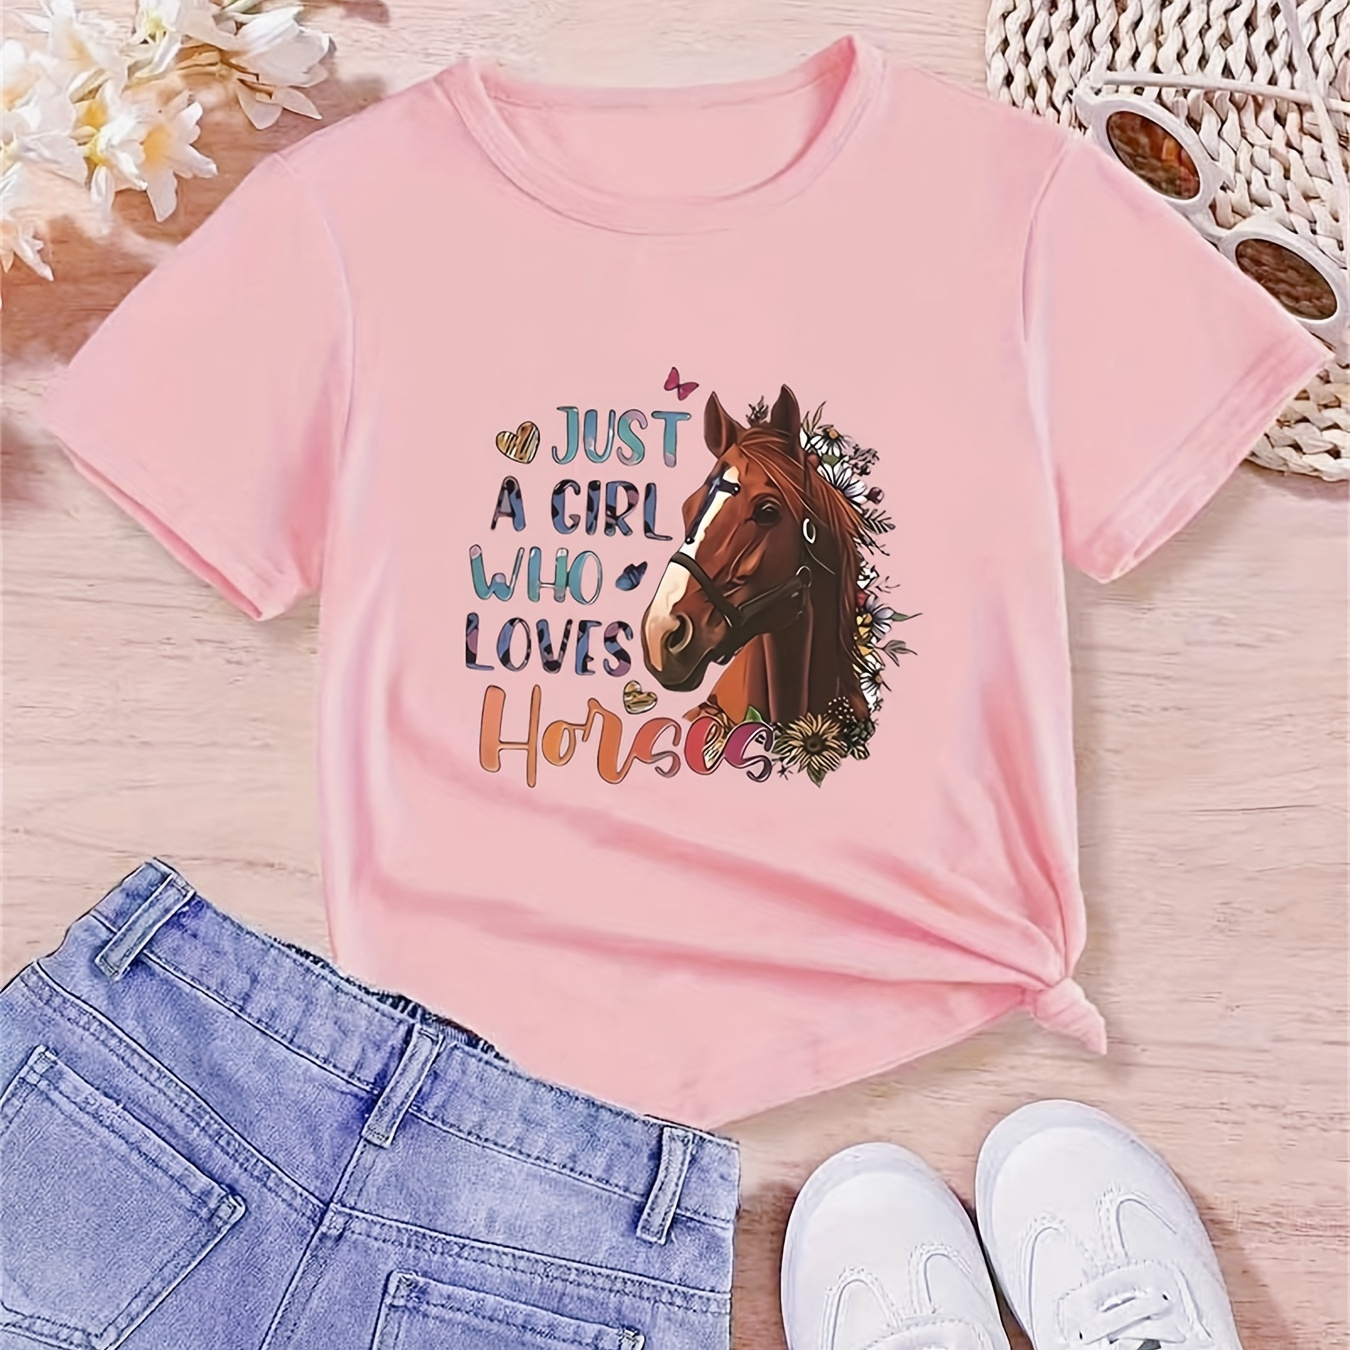 

Just A Girl Who Loves Horses & Cute Animal Pattern Print Girls Casual Fashion Comfortable Crew Neck T-shirt For Spring/ Summer, A Gift For Girls